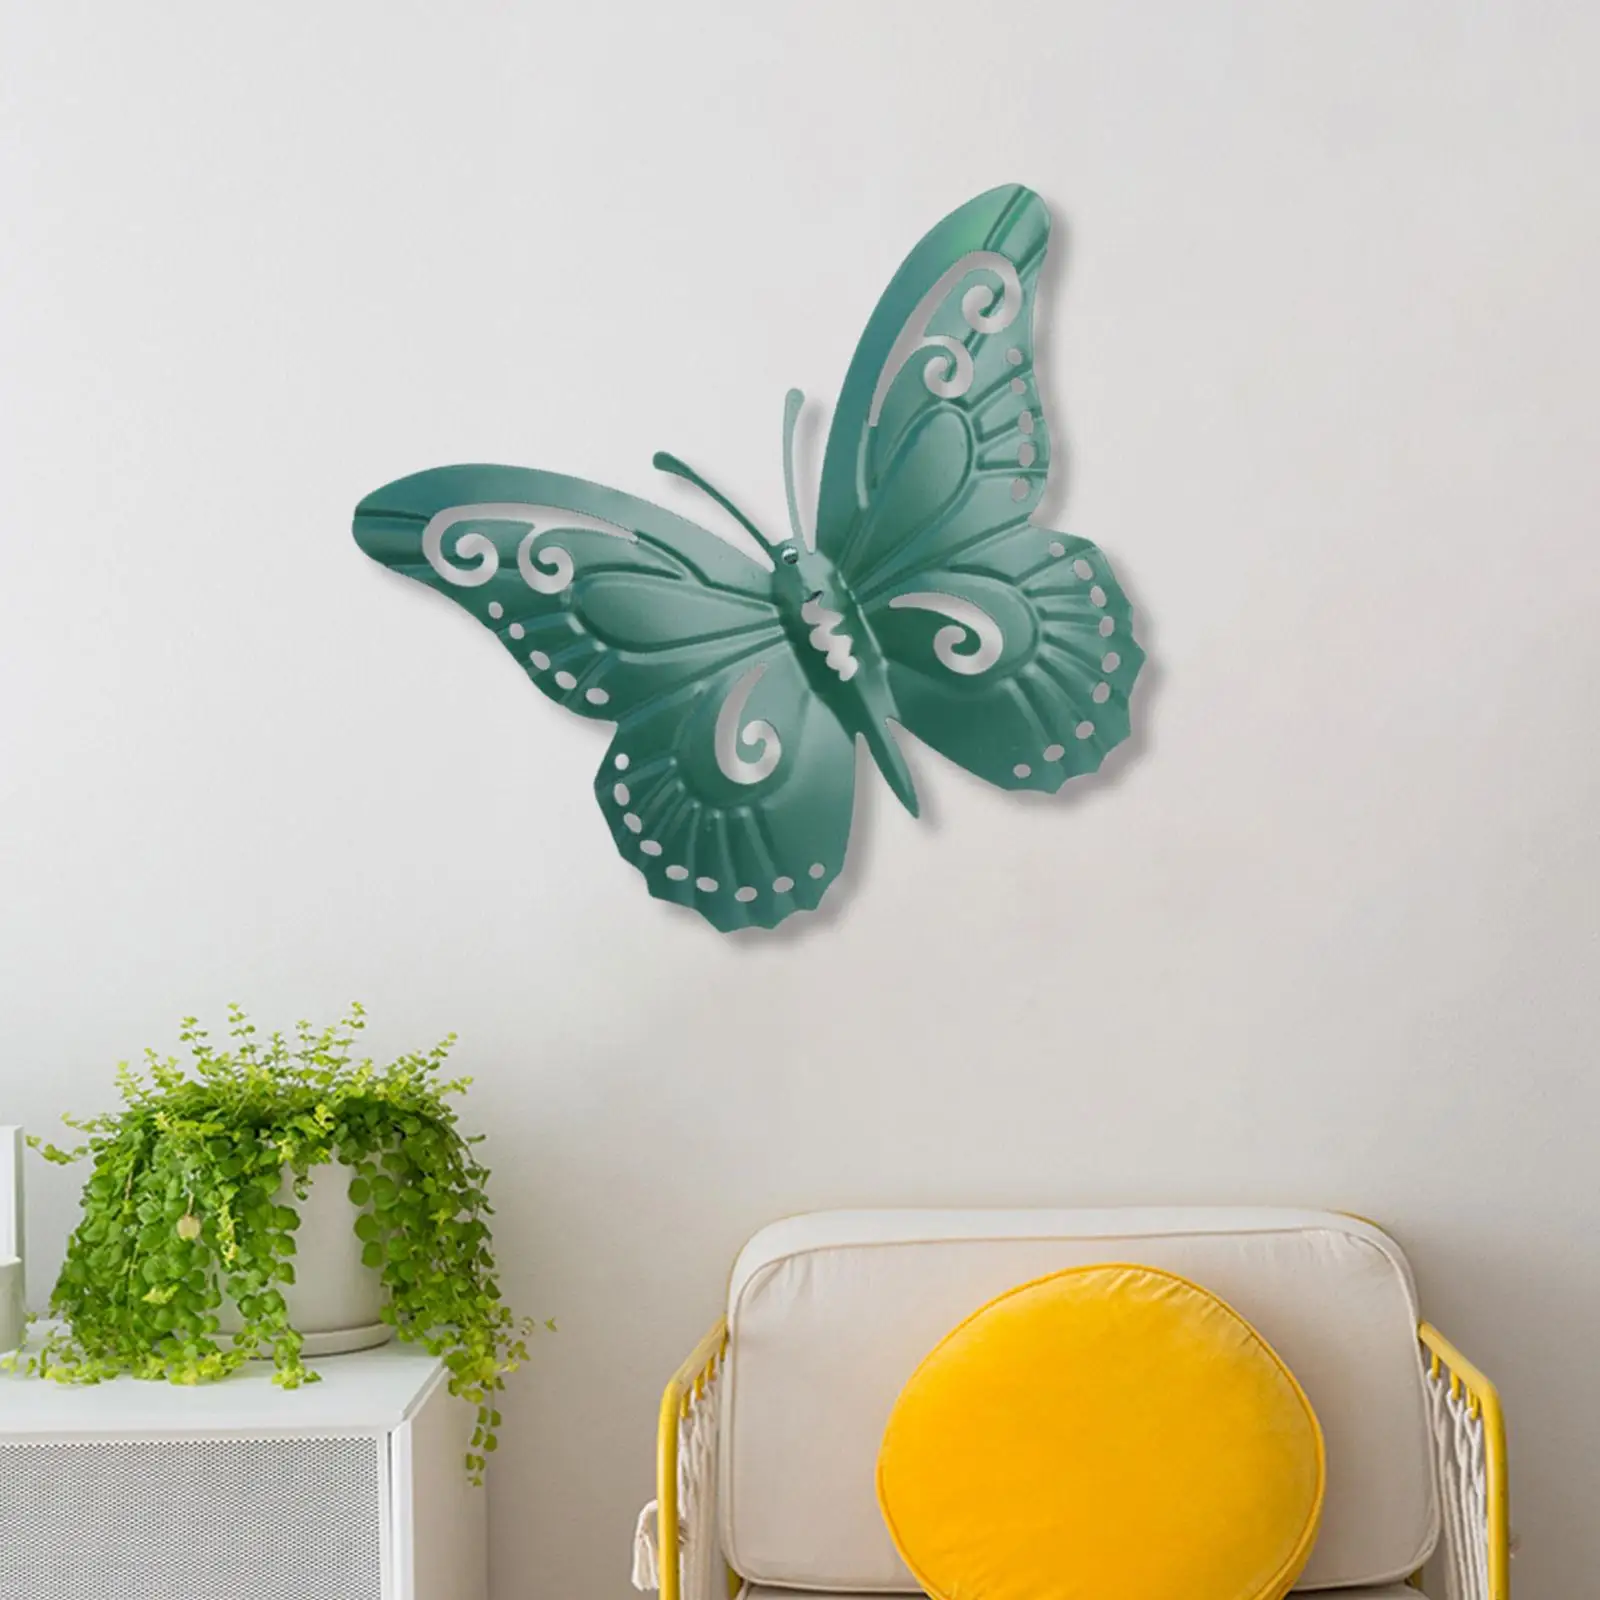 3D Butterfly Wall Decor Ornaments Decorative Sculpture Exquisite Metal for Outdoor Indoor living Room Yard Farmhouse